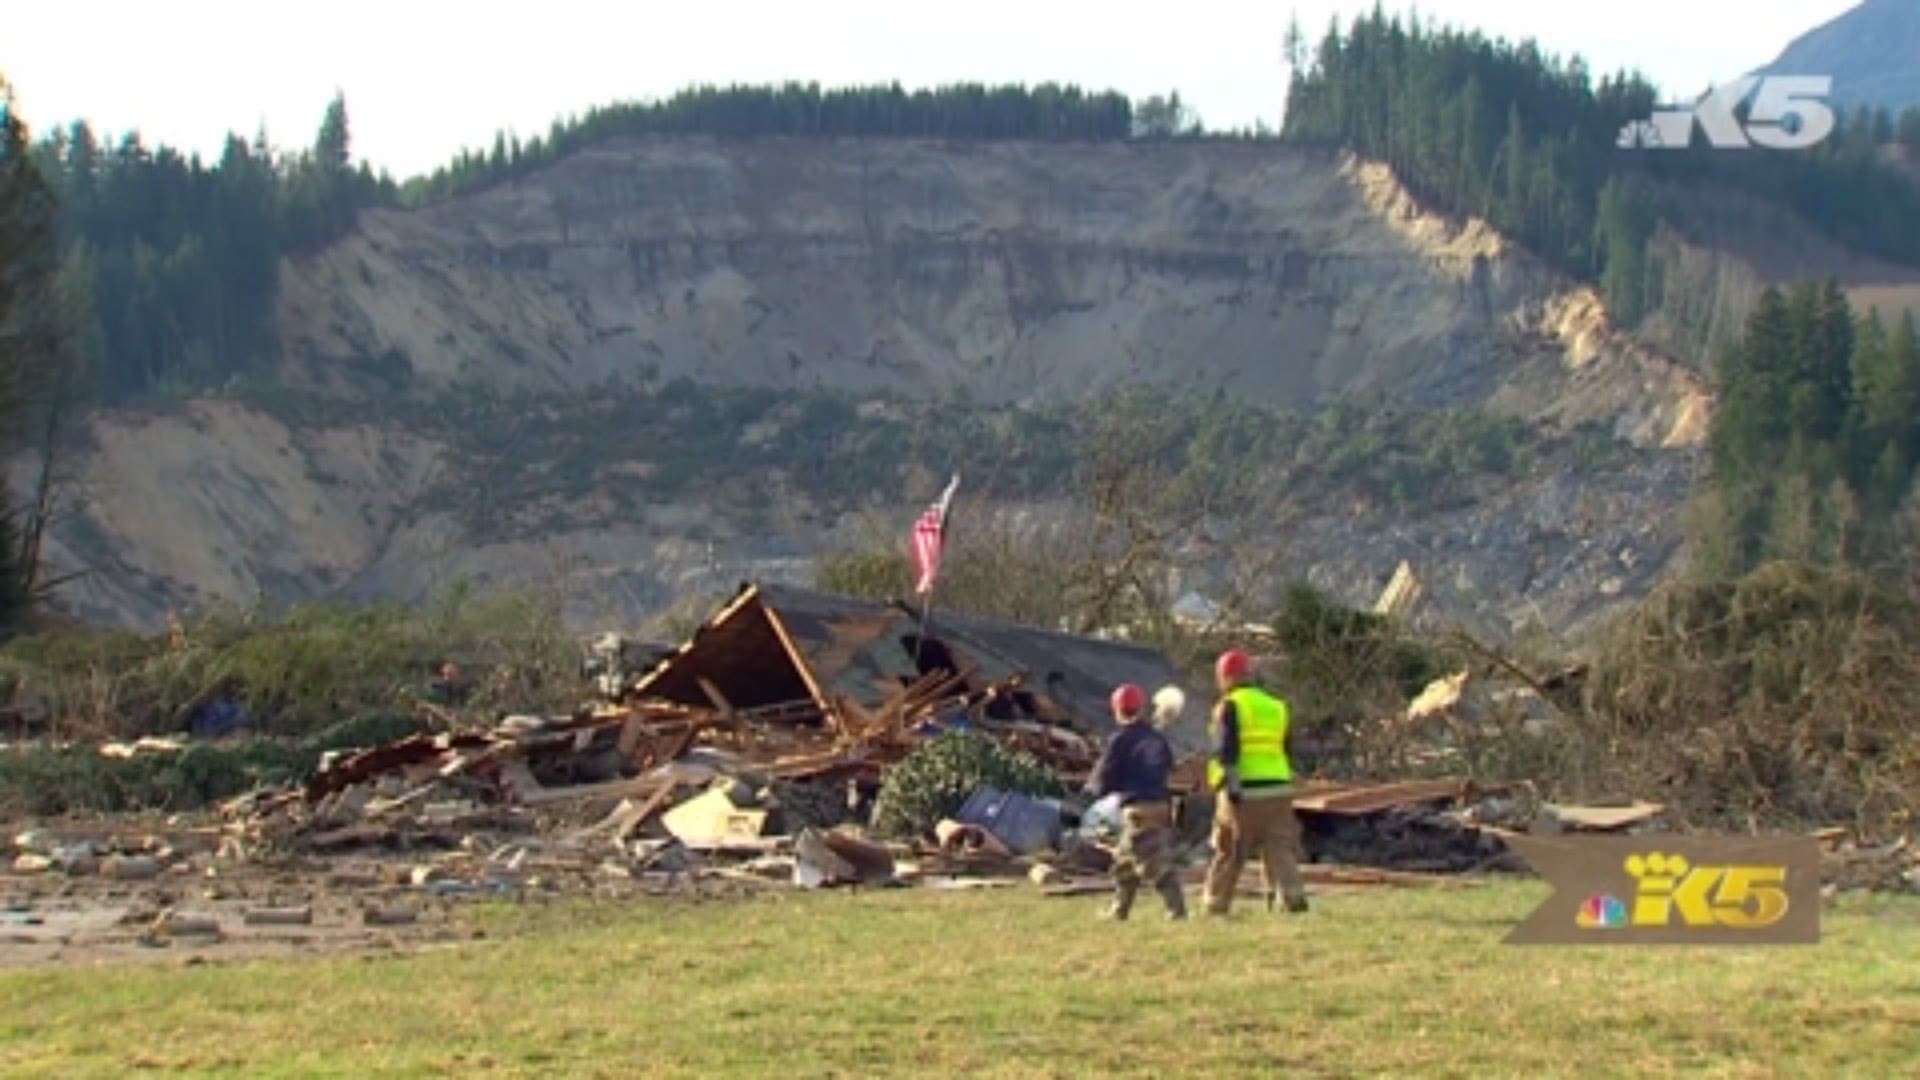 On March 22, 2014, 43 people died in the Oso landslide. On the first anniversary of the slide, we check in with survivors, first responders, and those impacted by the disaster. (This special originally aired in 2015.)